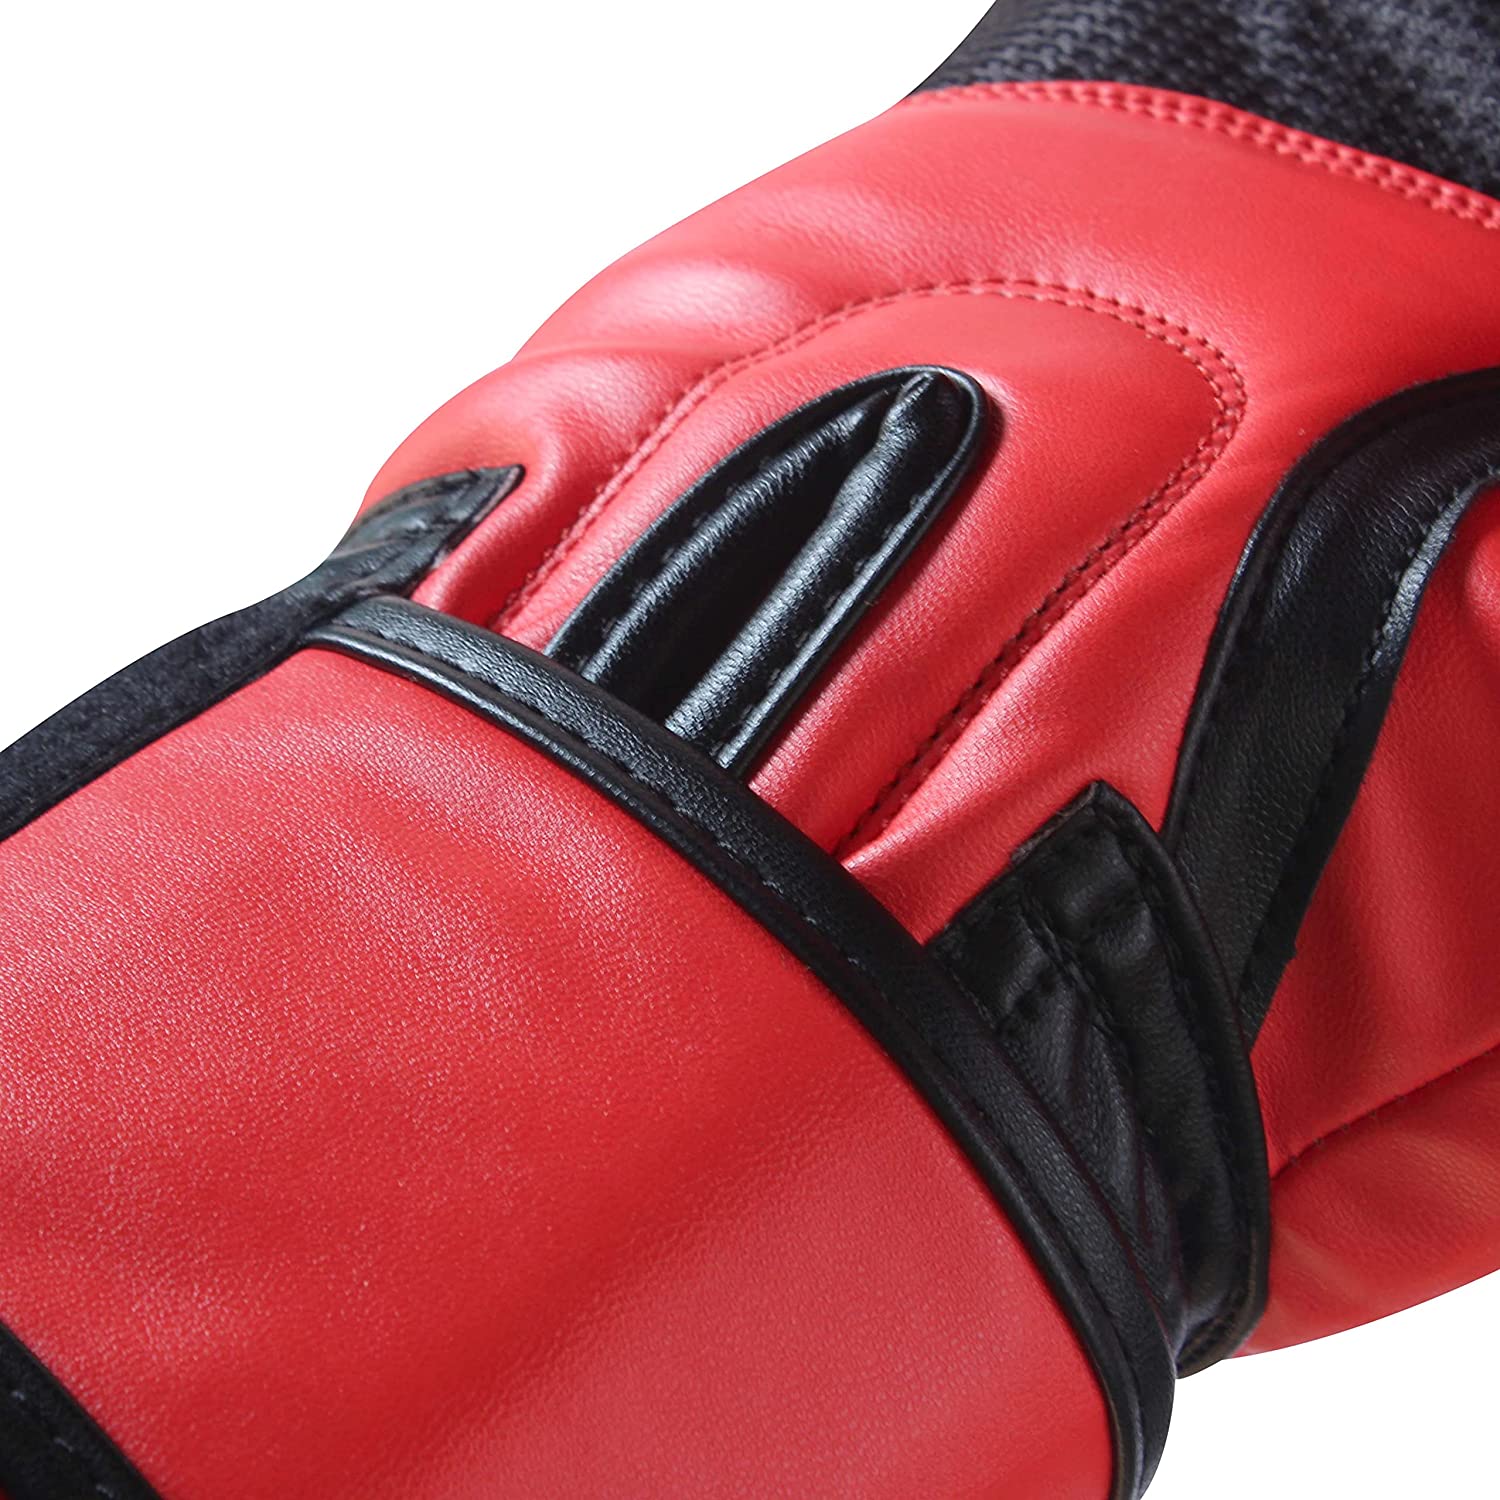 JJ Jonex Big Boss PU Punching Boxing Gloves for Adults and Experts (Red) sppartos